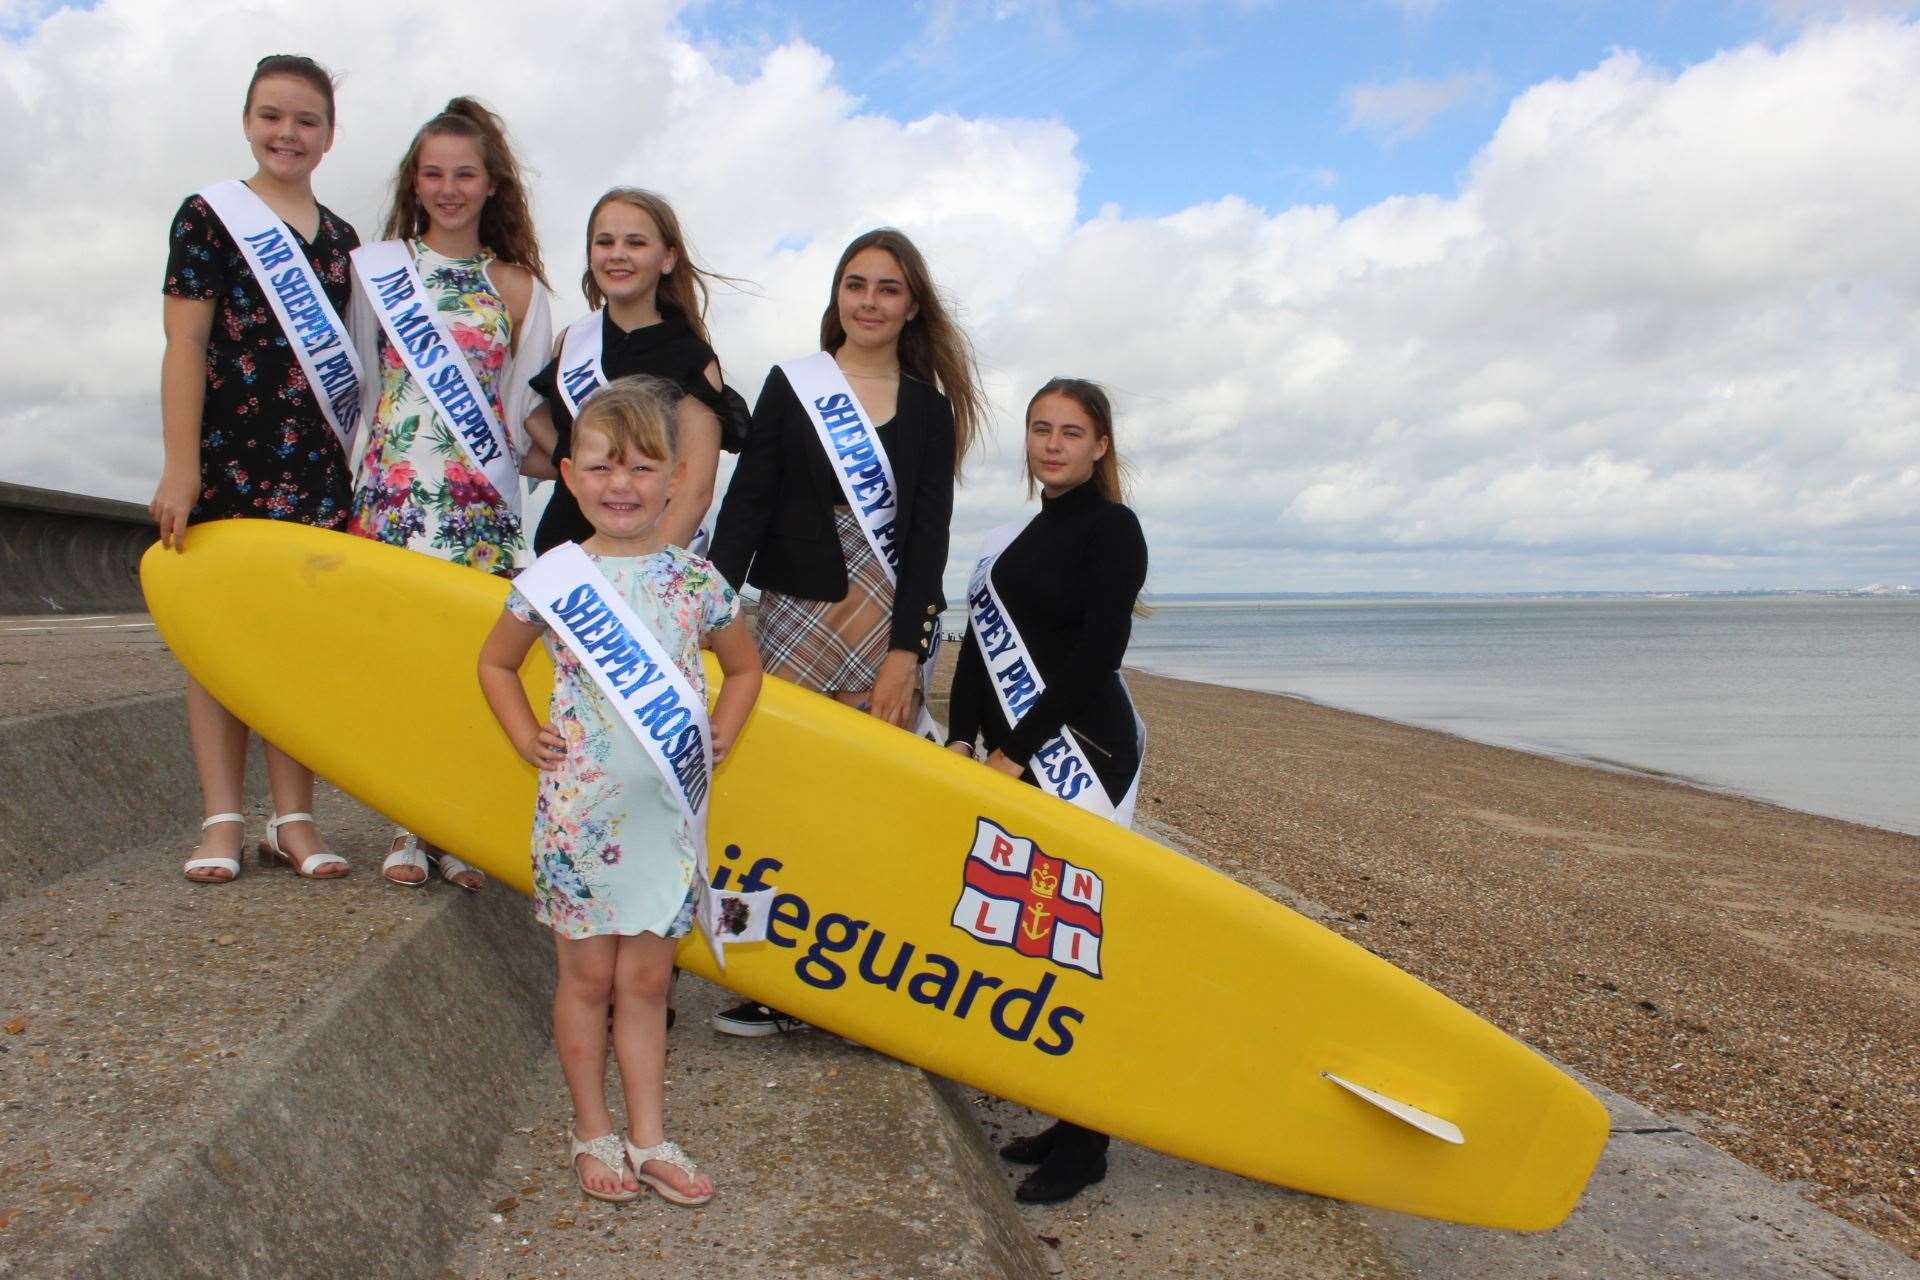 Making a splash: Sheppey carnival girls on the beach preparing for their big parade on Saturday. From the left, Lois Kidd, 10, Keira Collins-Kiazia, 13, carnival queen Melody Jackson, 15, Darcey Kidd, 14, and Paige Heaton, 14, with Sheppey Rosebud Evie Bowes, 5, in the front. Picture: John Nurden (15016567)